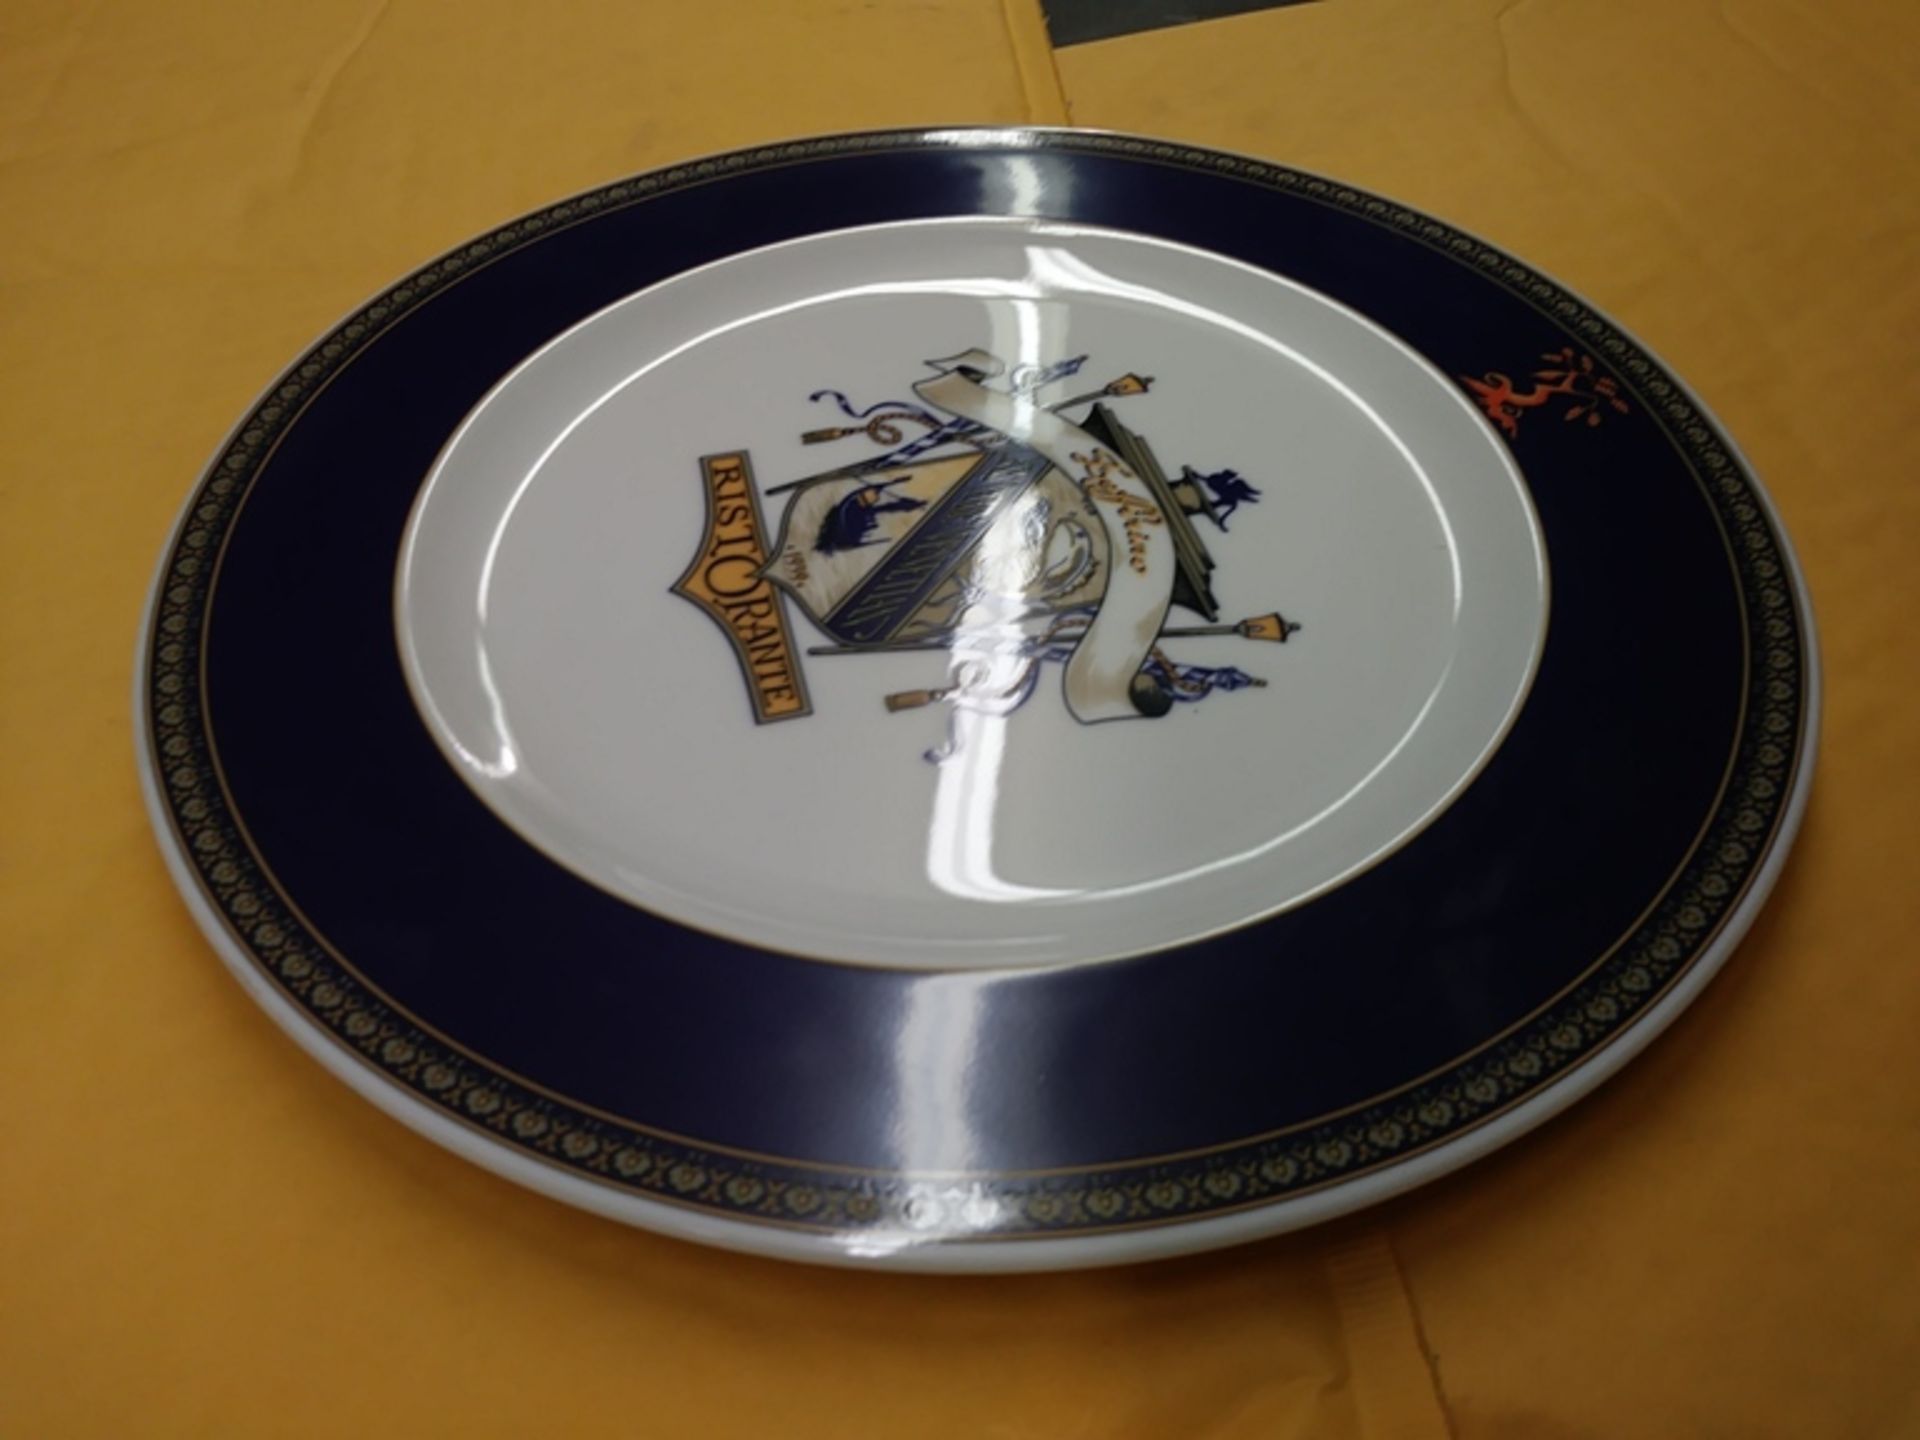 NEW 12" SCHONWALD PLATE (INCLUDES QTY: 96)